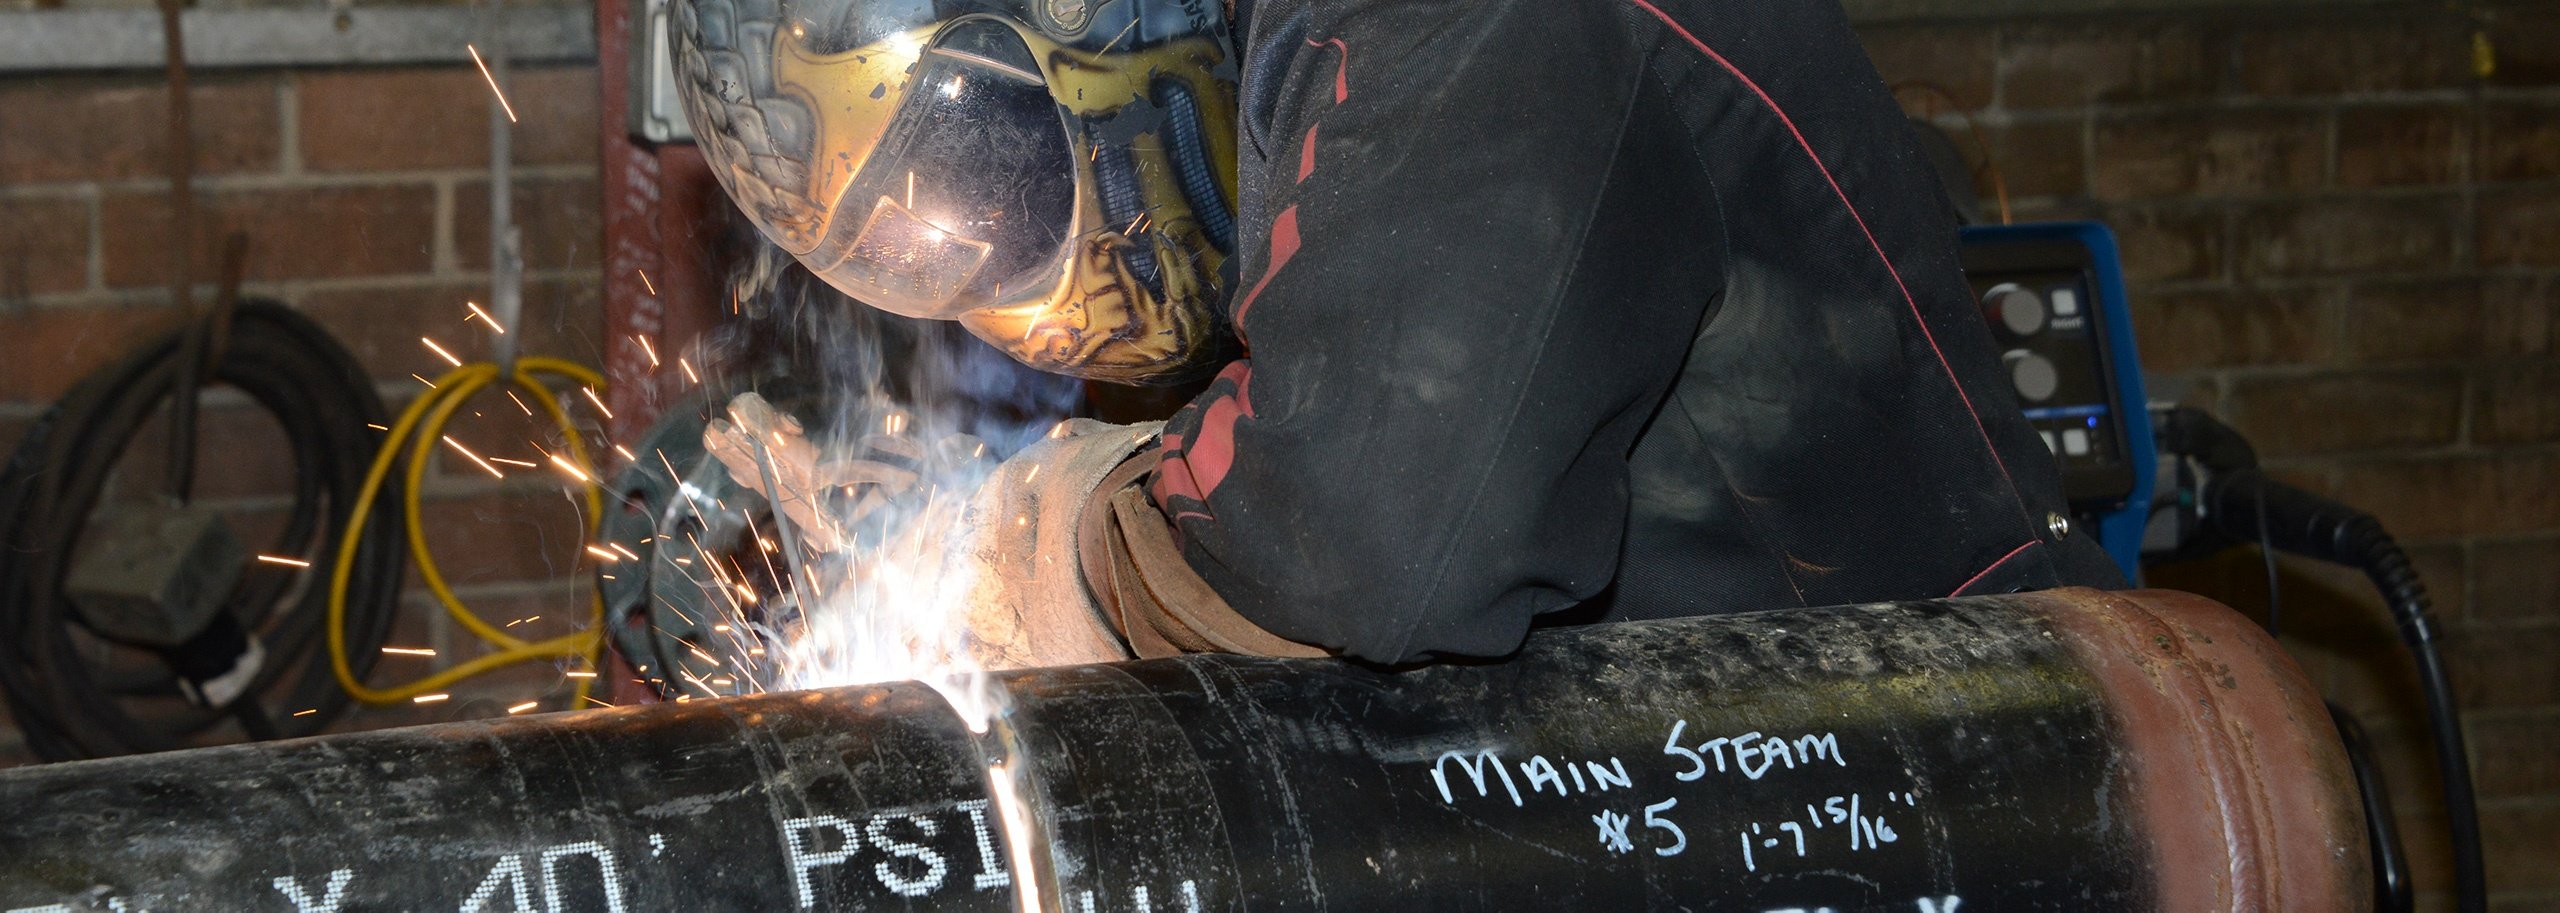 UA VIP Fort Carson Welding Class 22 begins with 11 new students